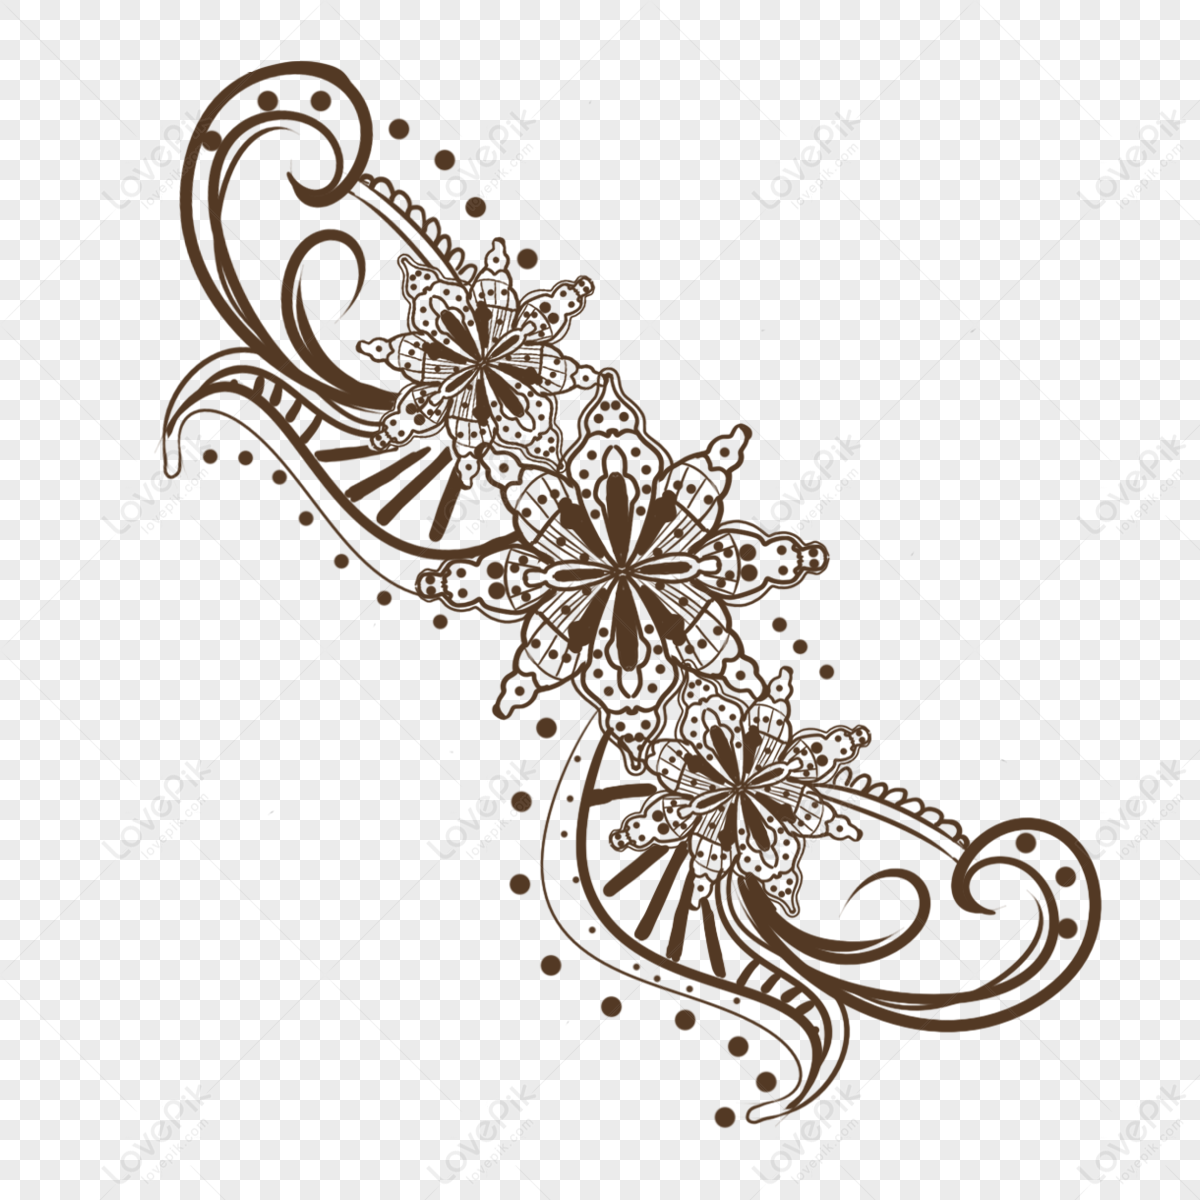 Henna Logo Photos and Images | Shutterstock